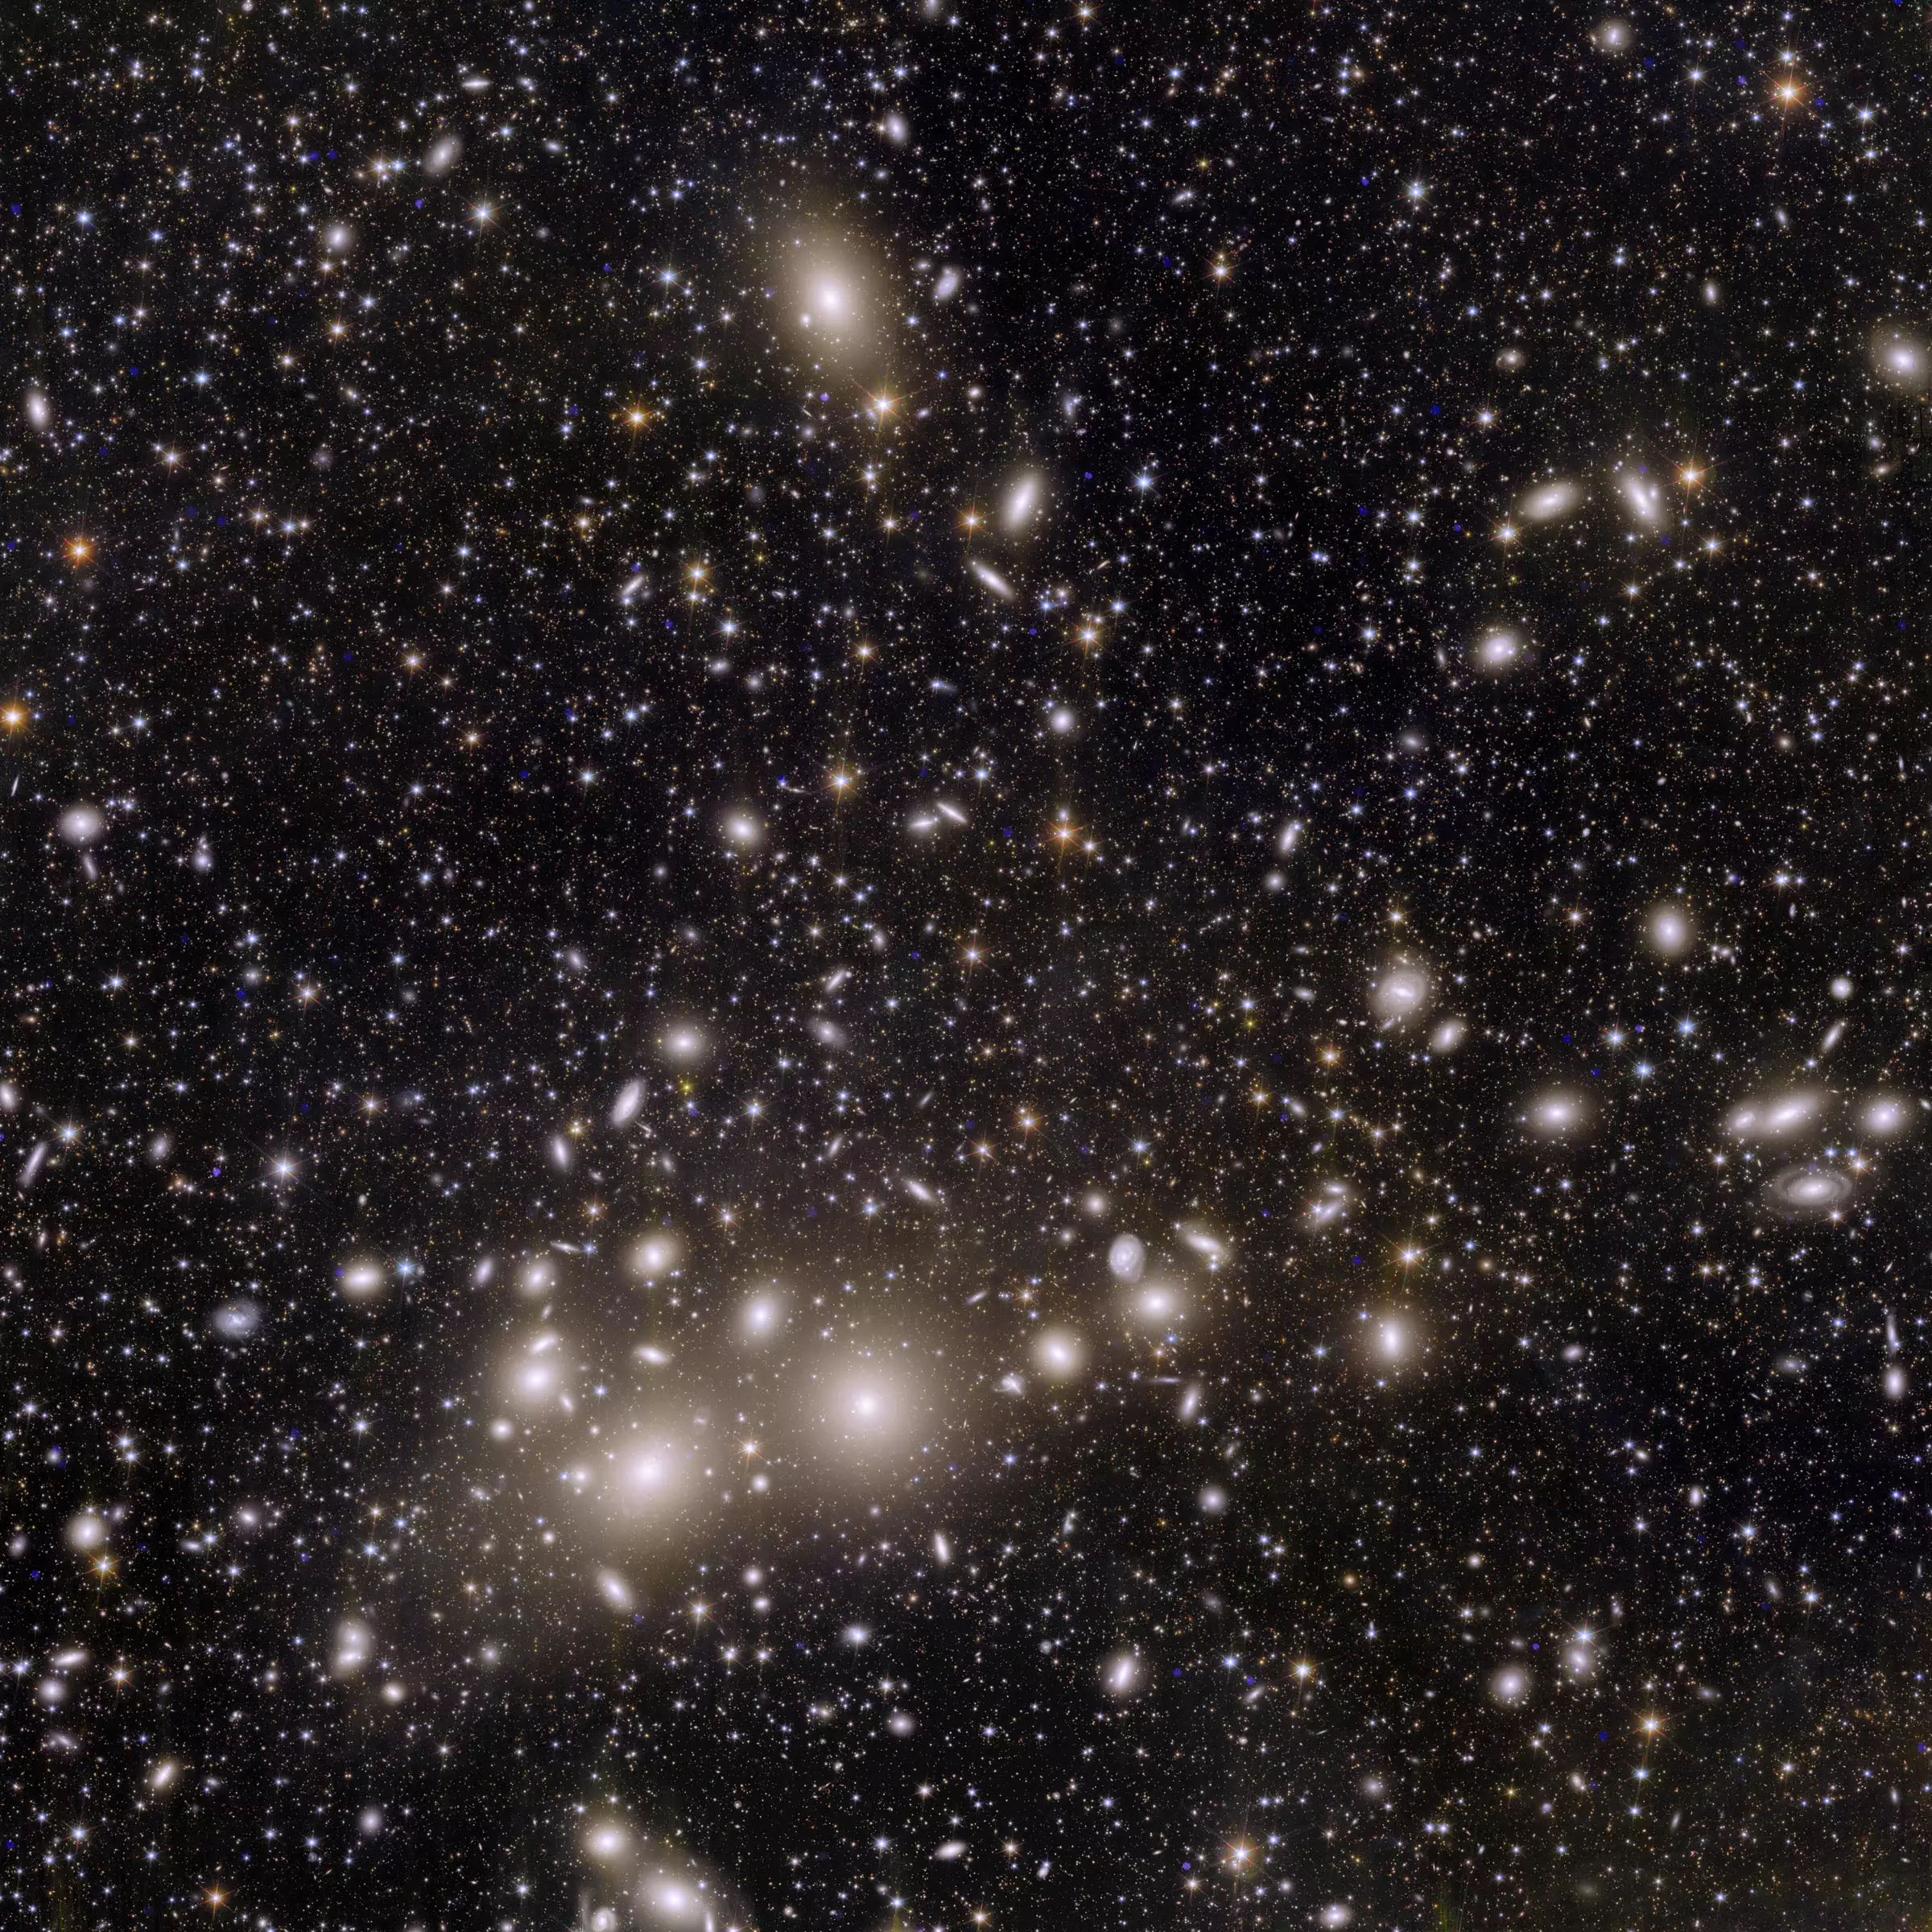 Square image with black background and a collection of scattered point-shaped white light sources next to many small and larger blurred spots